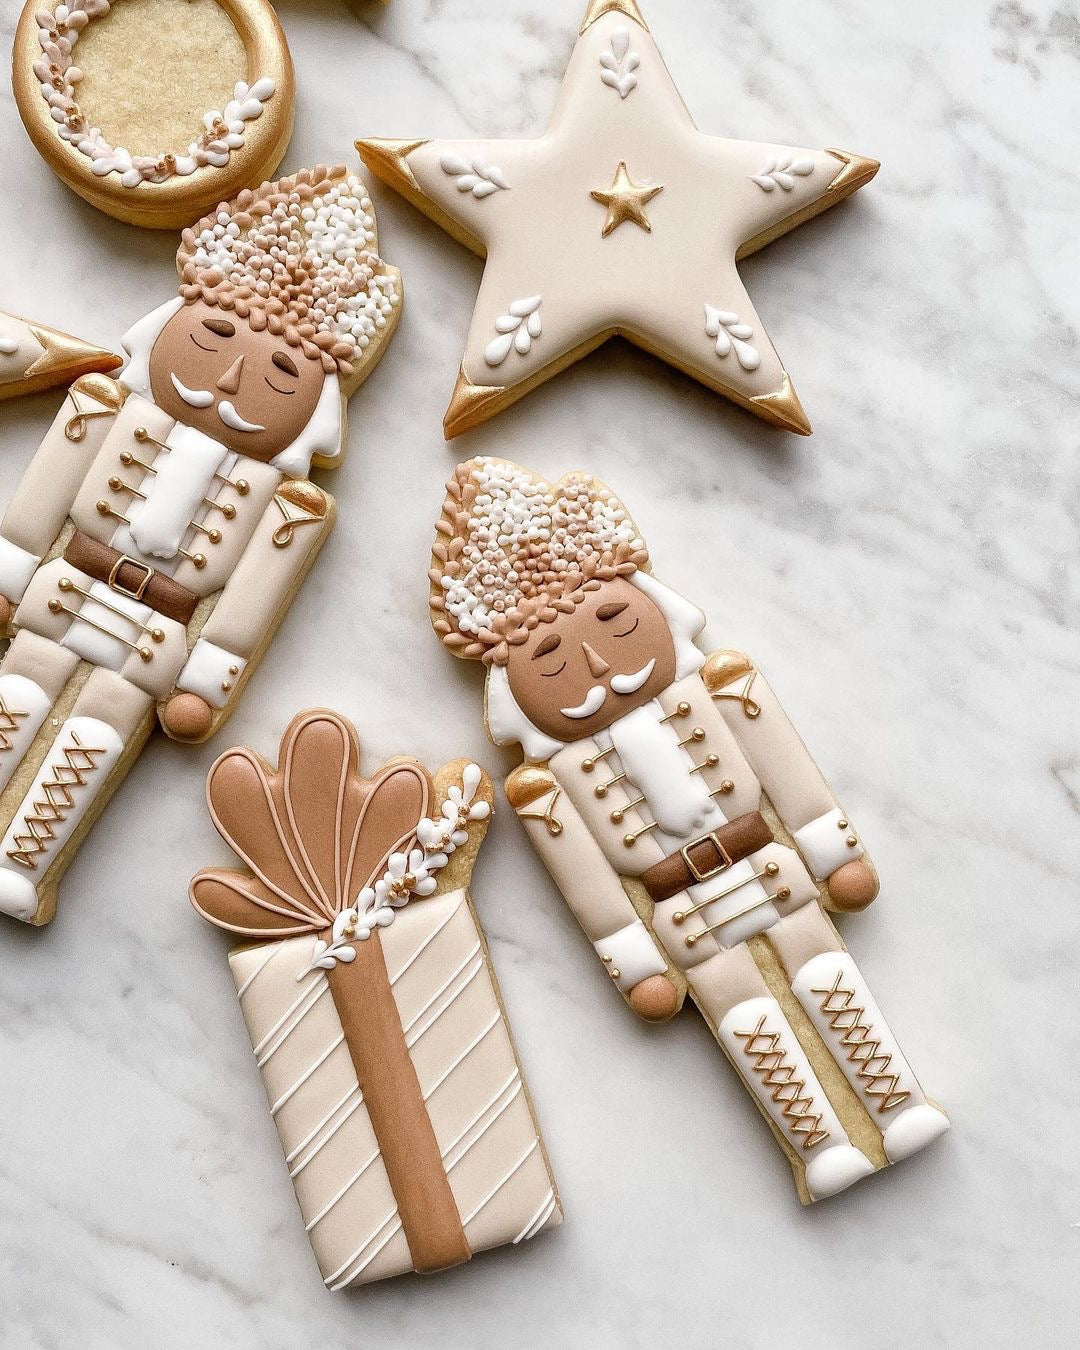 The Nutcracker by The Cookie Gallery